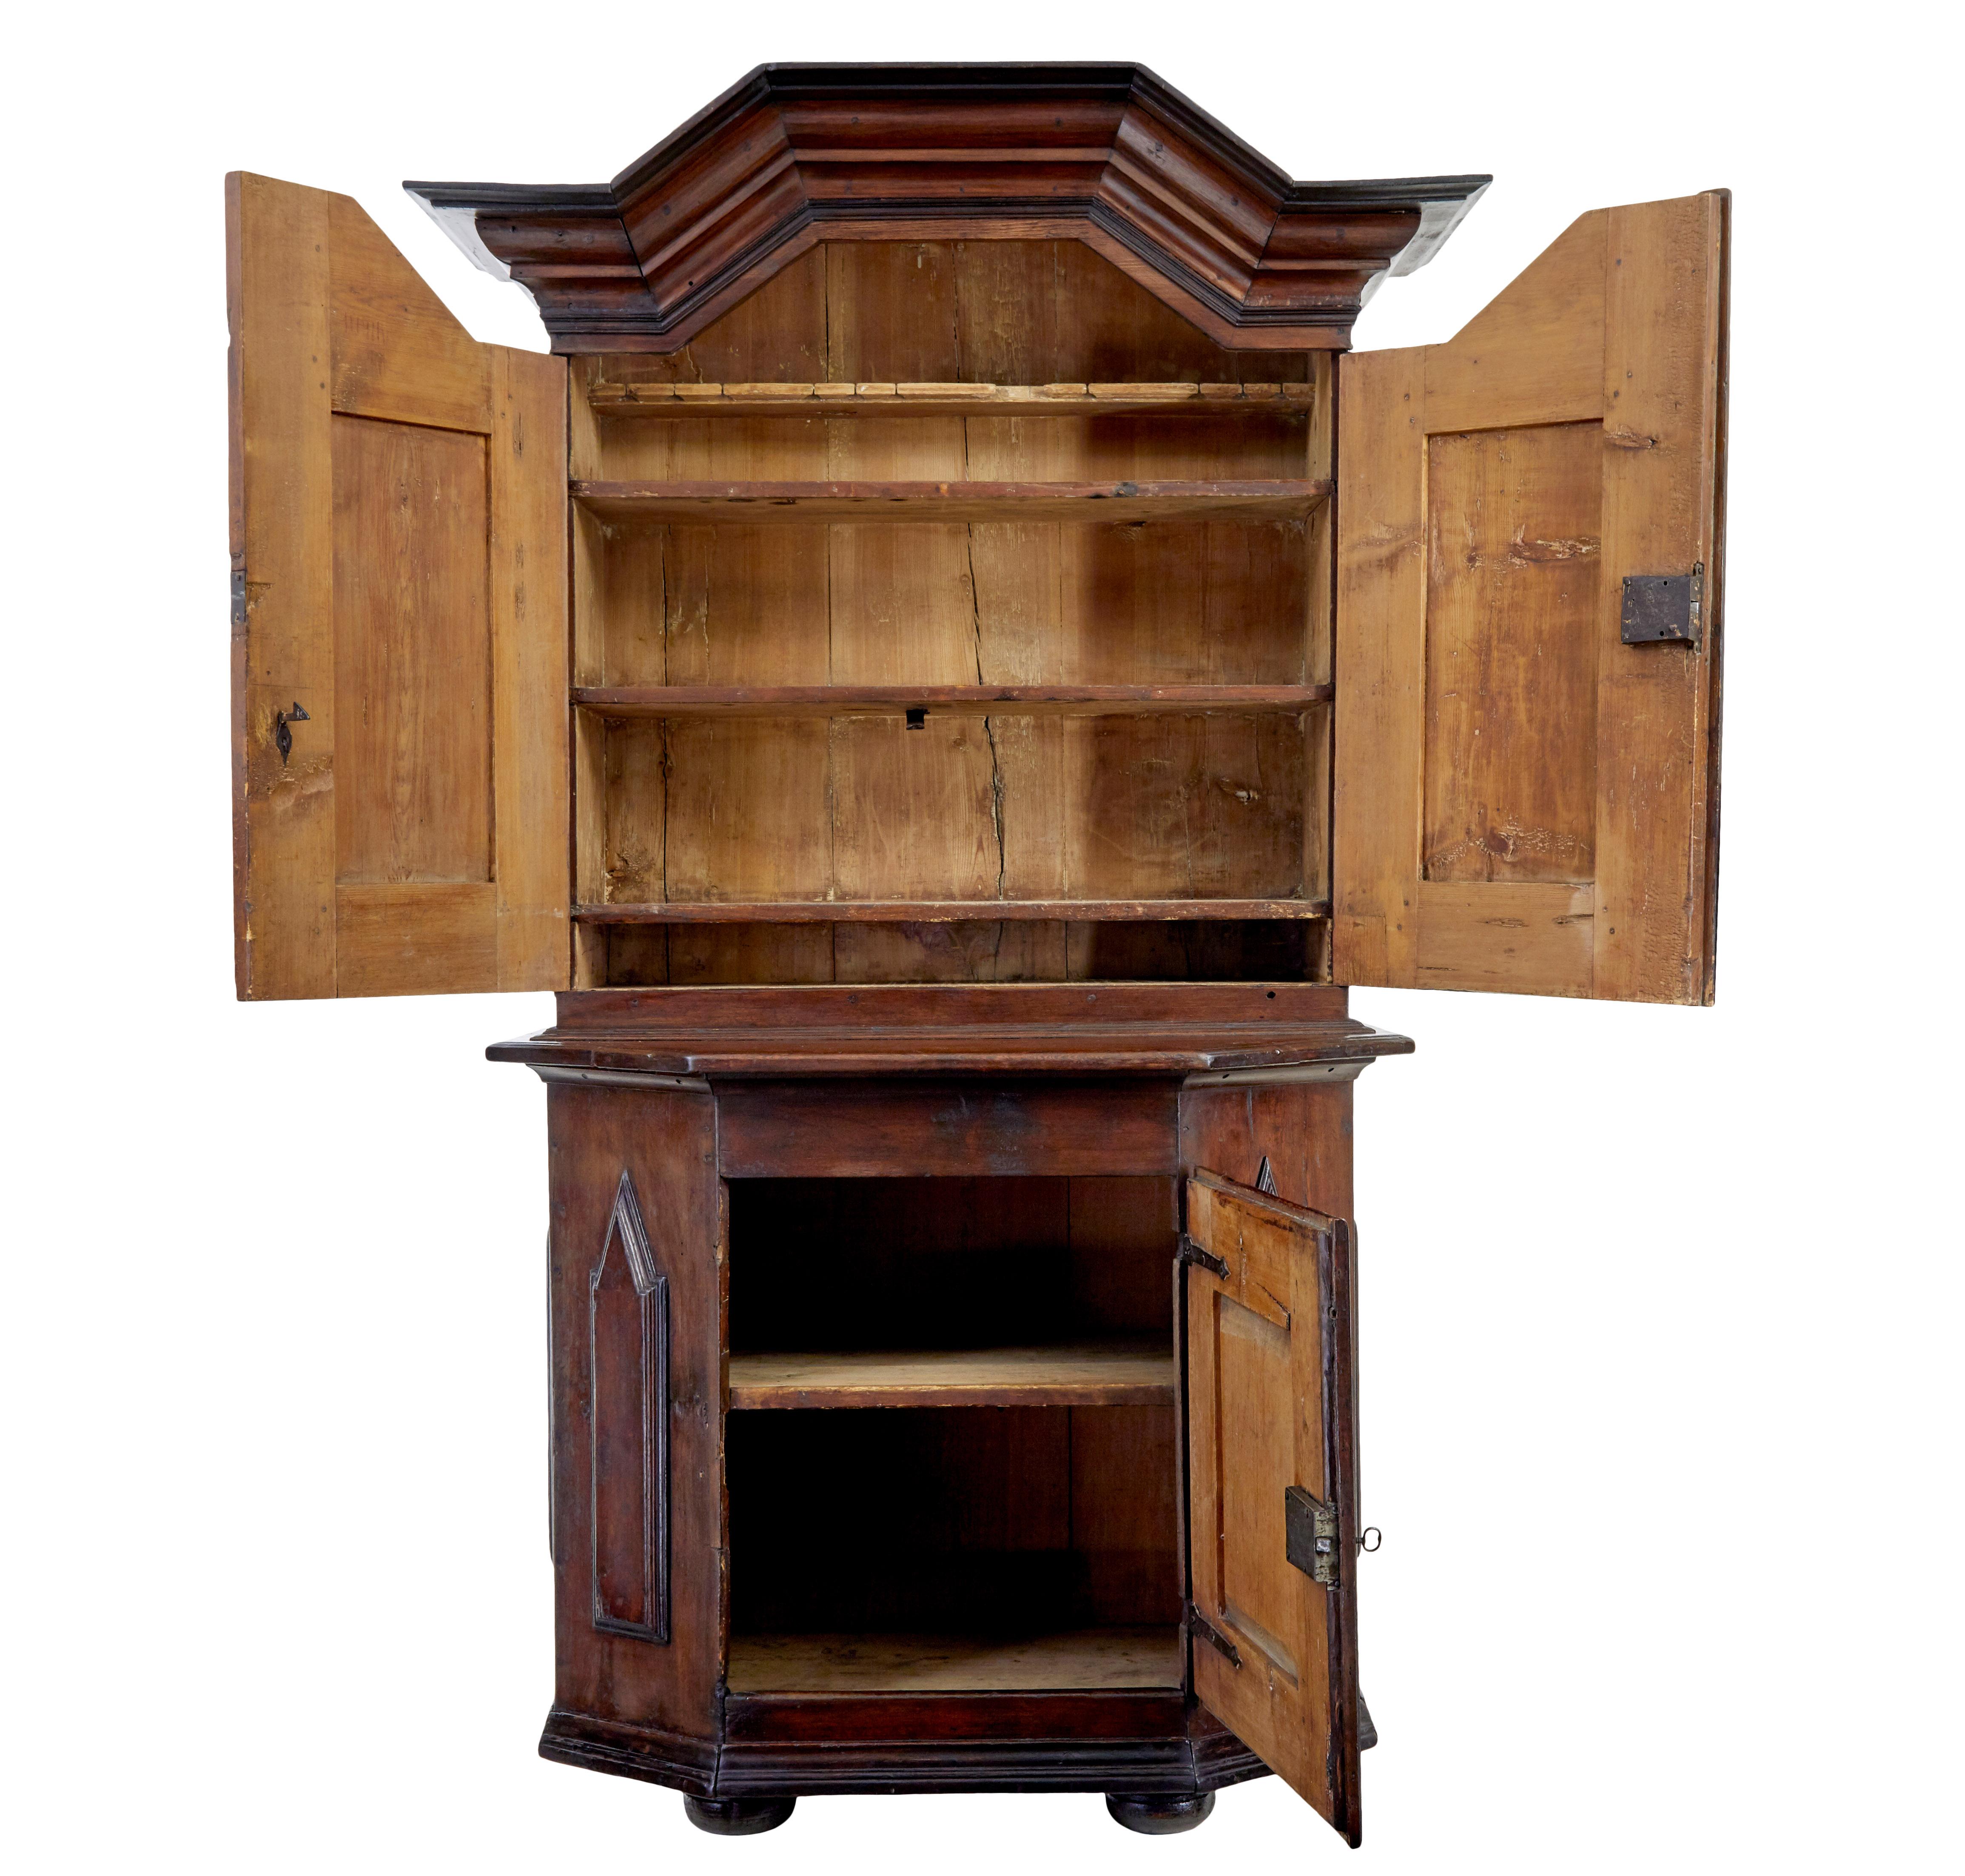 Rustic Swedish 2 part baroque cupboard circa 1790.

Stained pine baroque cupboard, a real piece of Scandinavian rustic made furniture.  Shaped cornice below and double door cupboard containing various fixed shelves.  Shaped bottom section with a